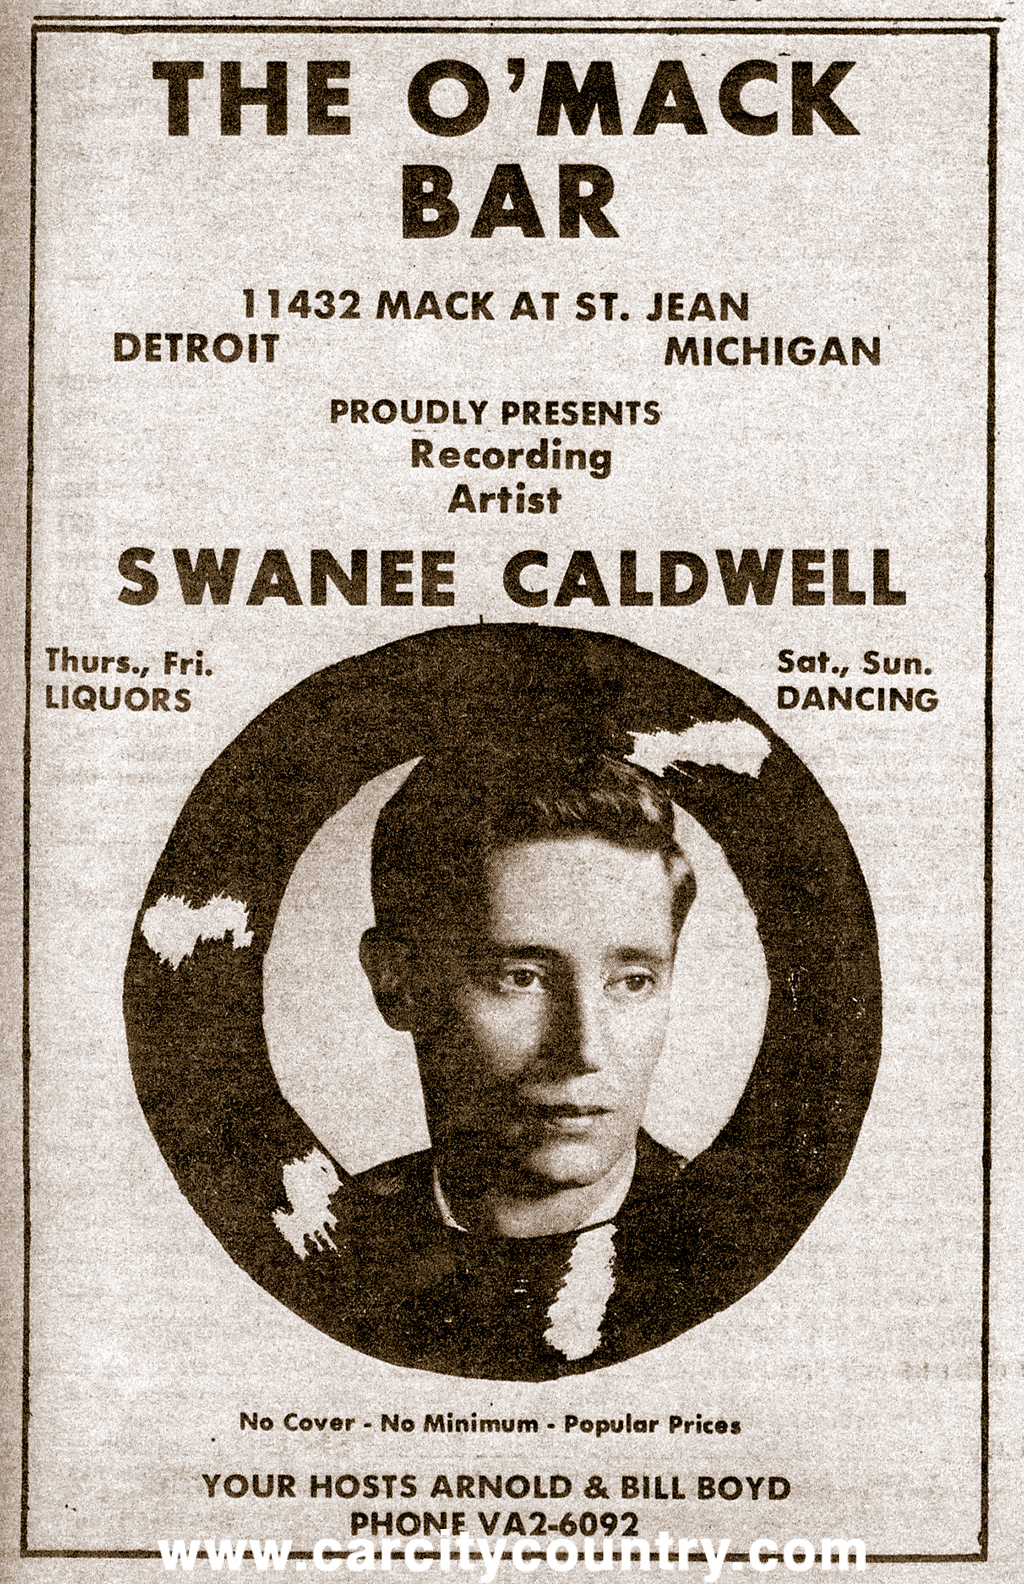 Ad for Swanee Caldwell at the O'Mack Bar in Detroit.